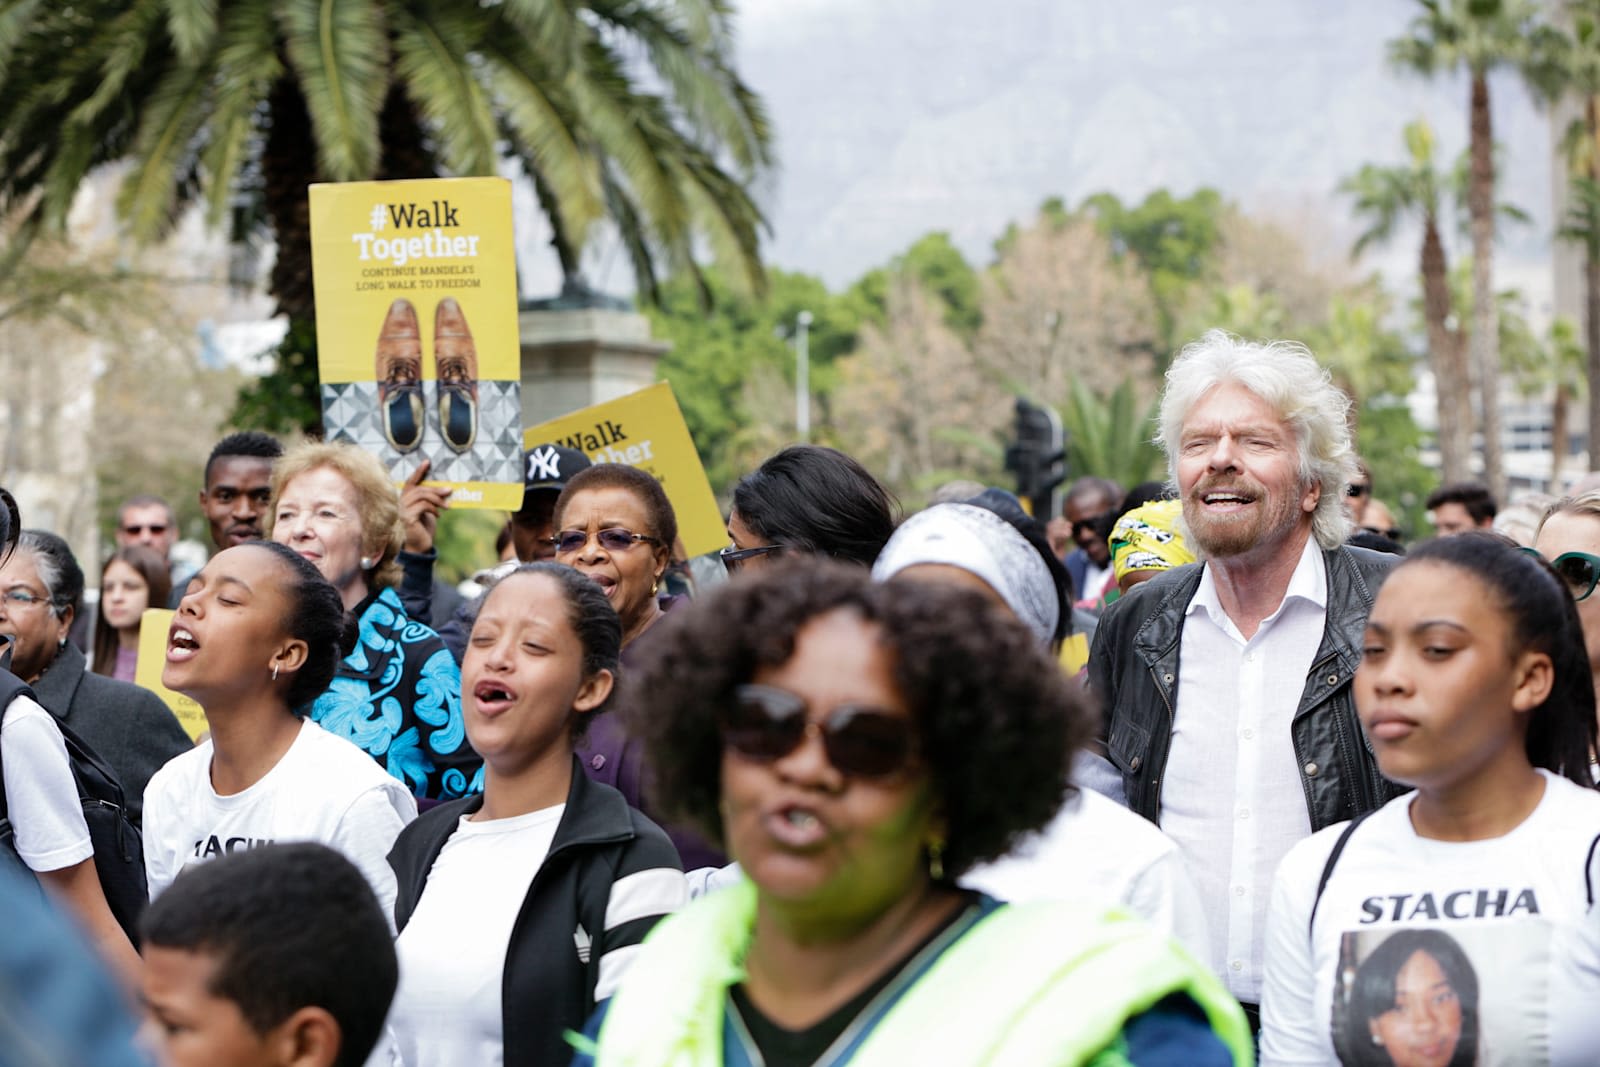 Richard Branson walking with elders some of whom are holding up signs 